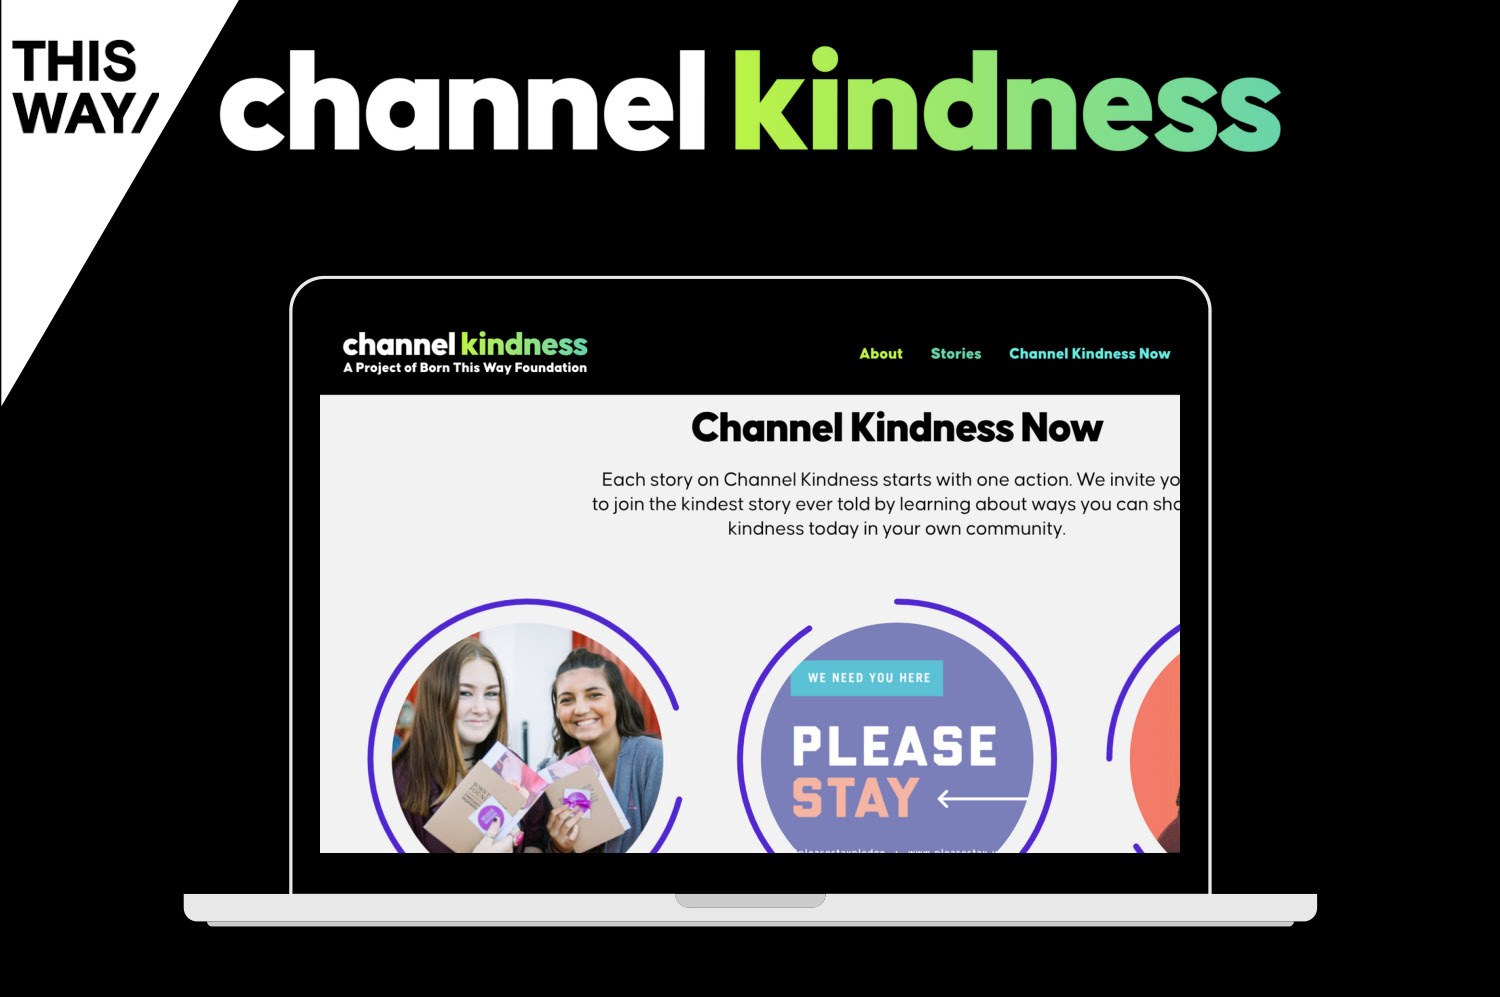 Black graphic with an image of a laptop displaying channelkindness.org + channel kindness logo at the top and "THIS WAY/" branded cornerstone in the top left corner.